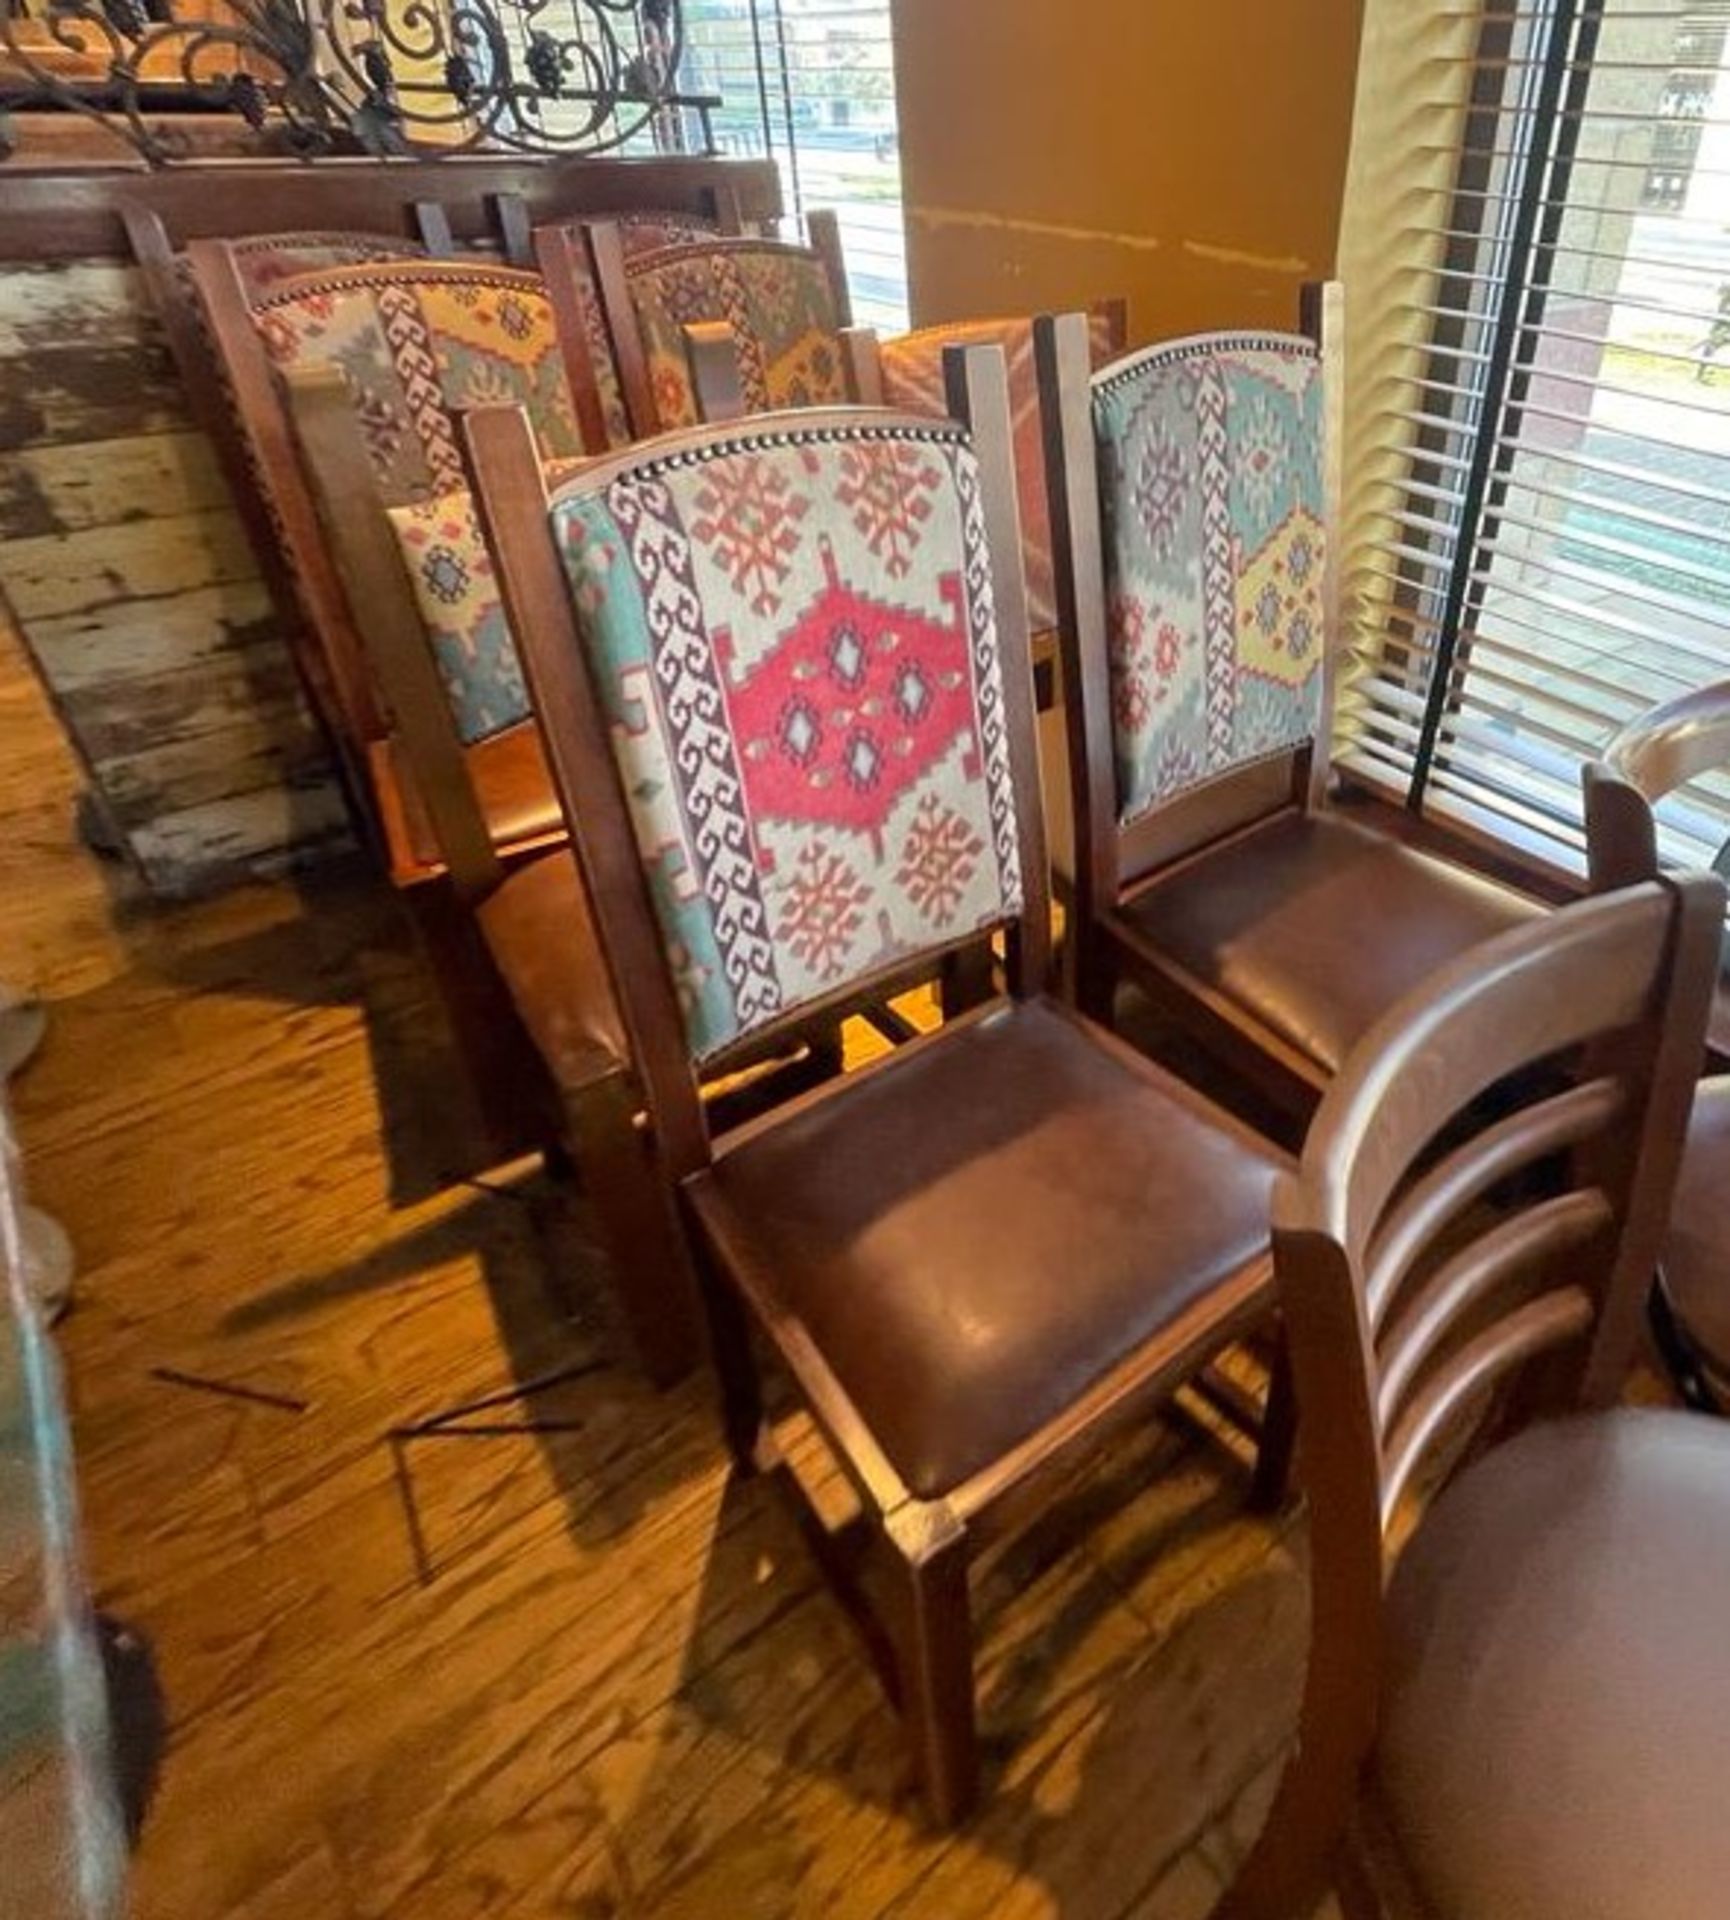 15 x High Back Dining Chairs From a Mexican Themed Restaurant - Features Wooden Frames, Brown Seat - Image 7 of 9